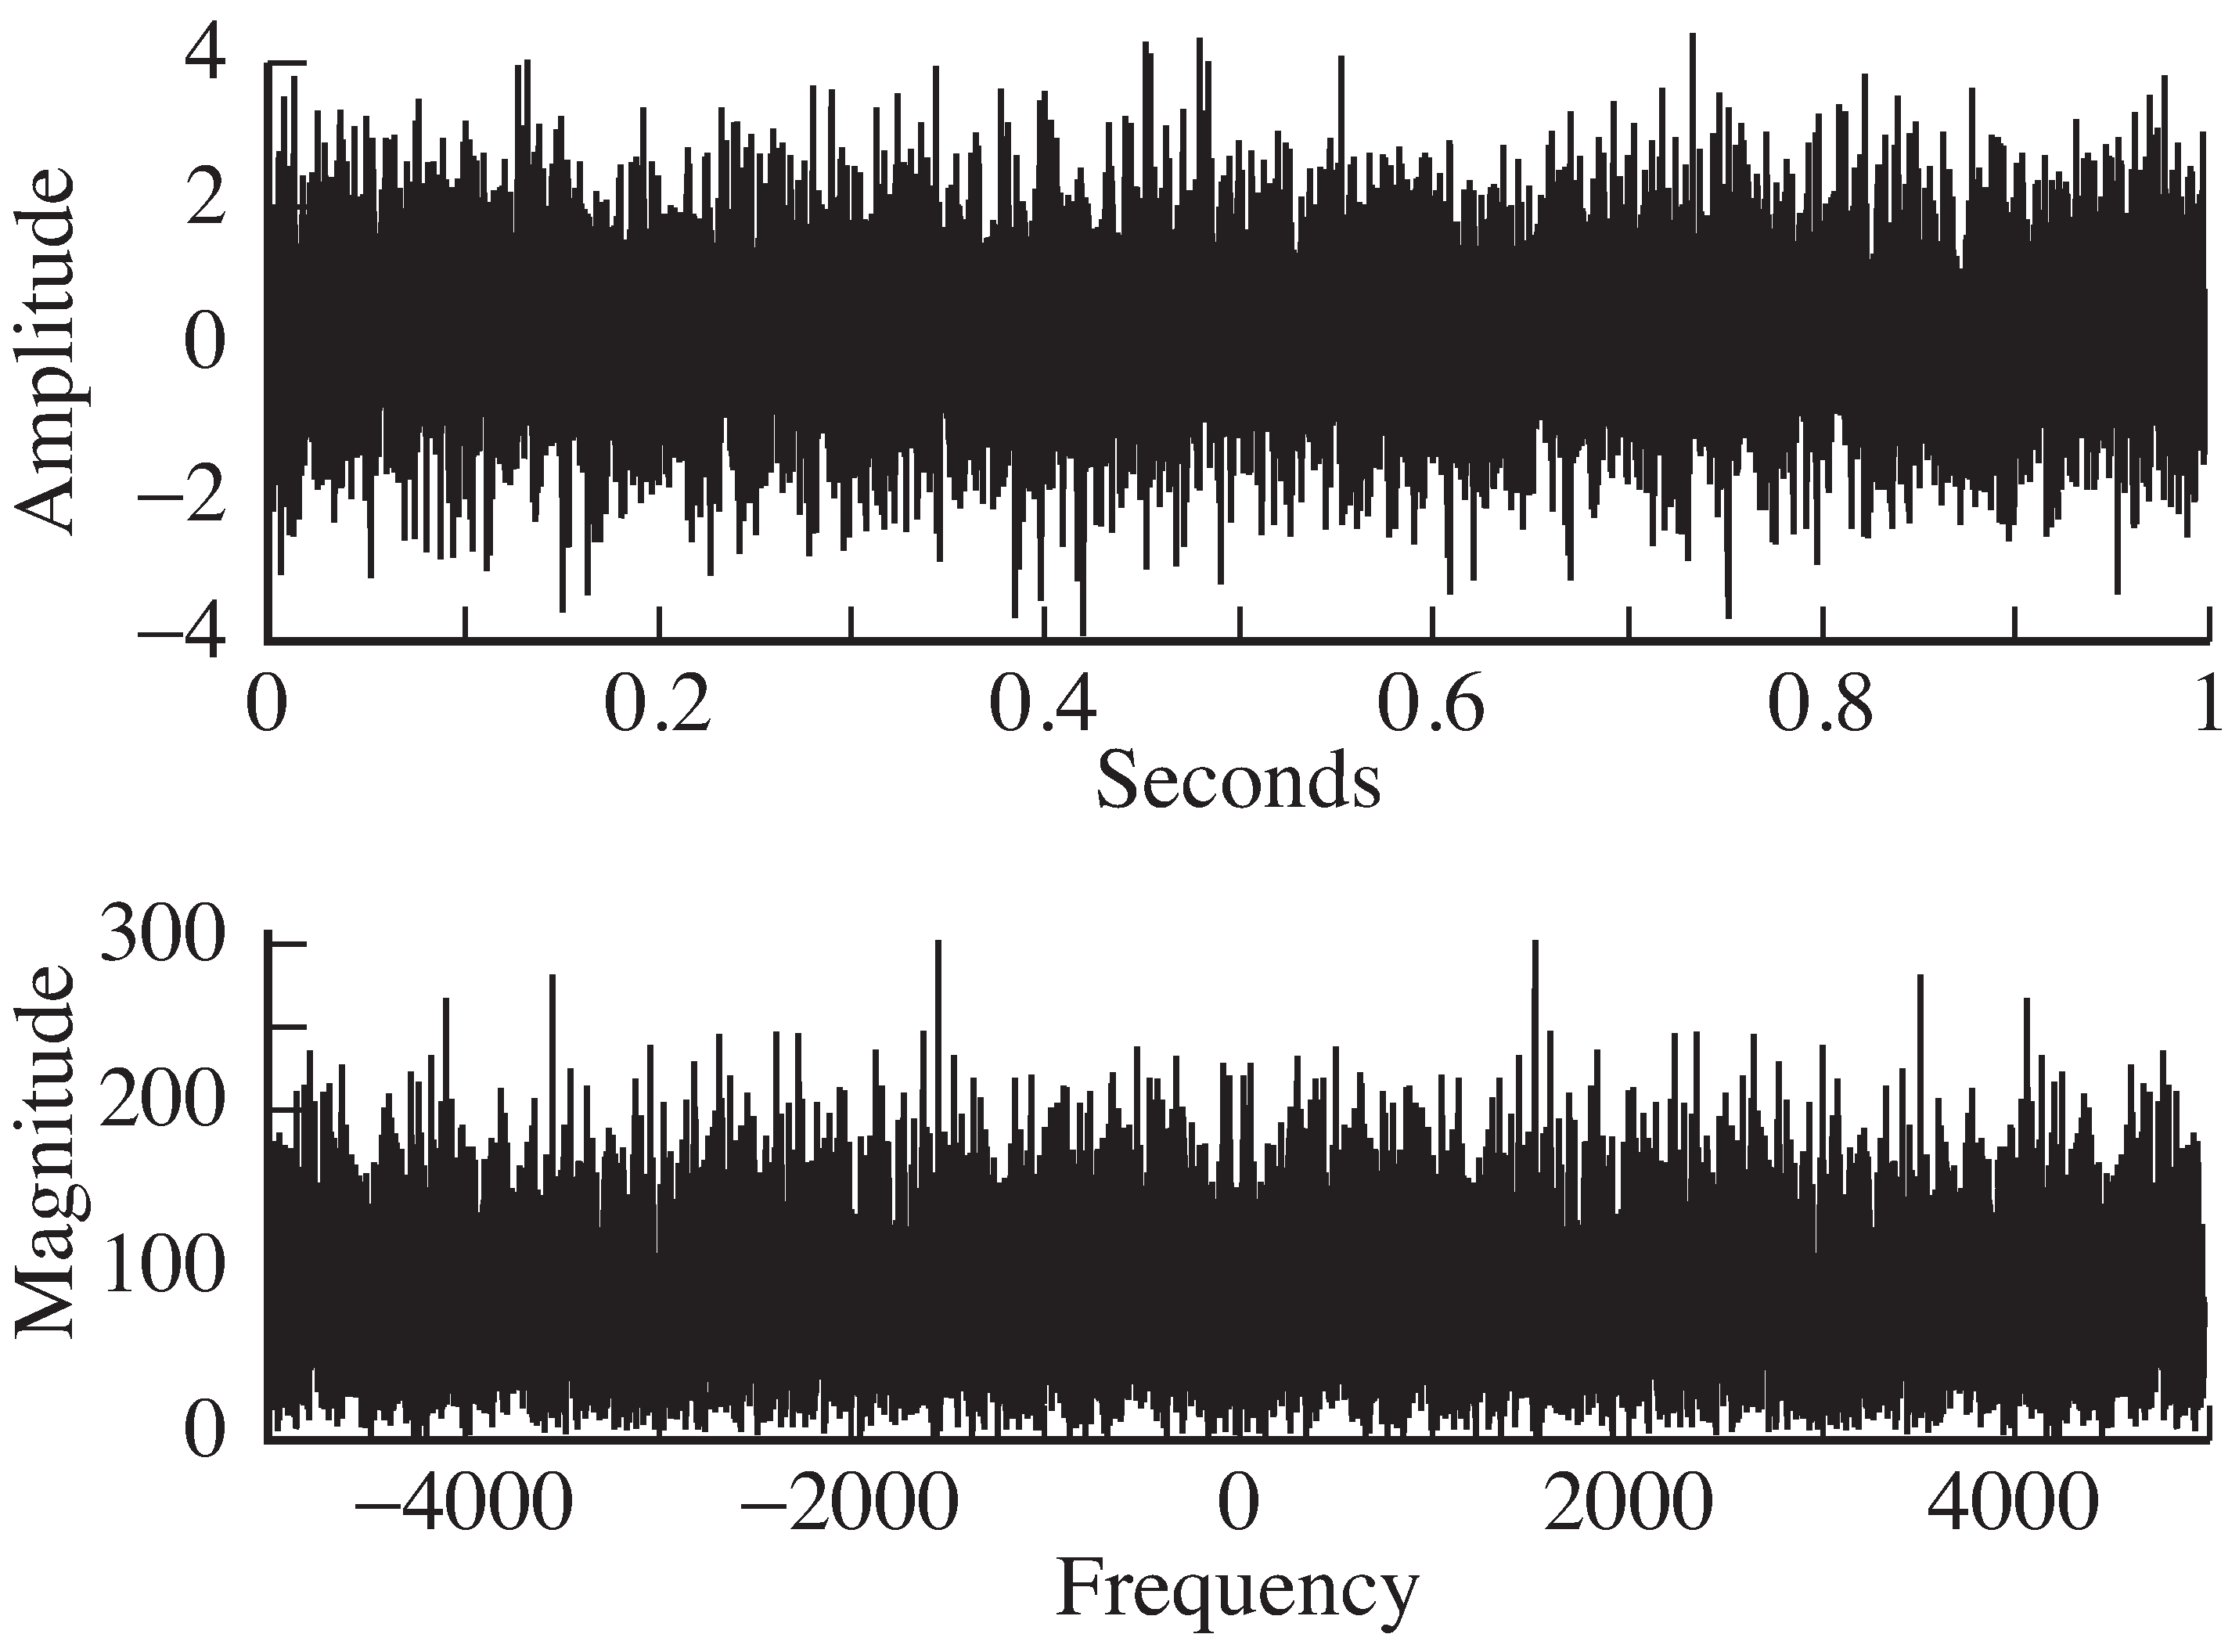 A noise signal and its spectrum, as calculated using plotspec.m